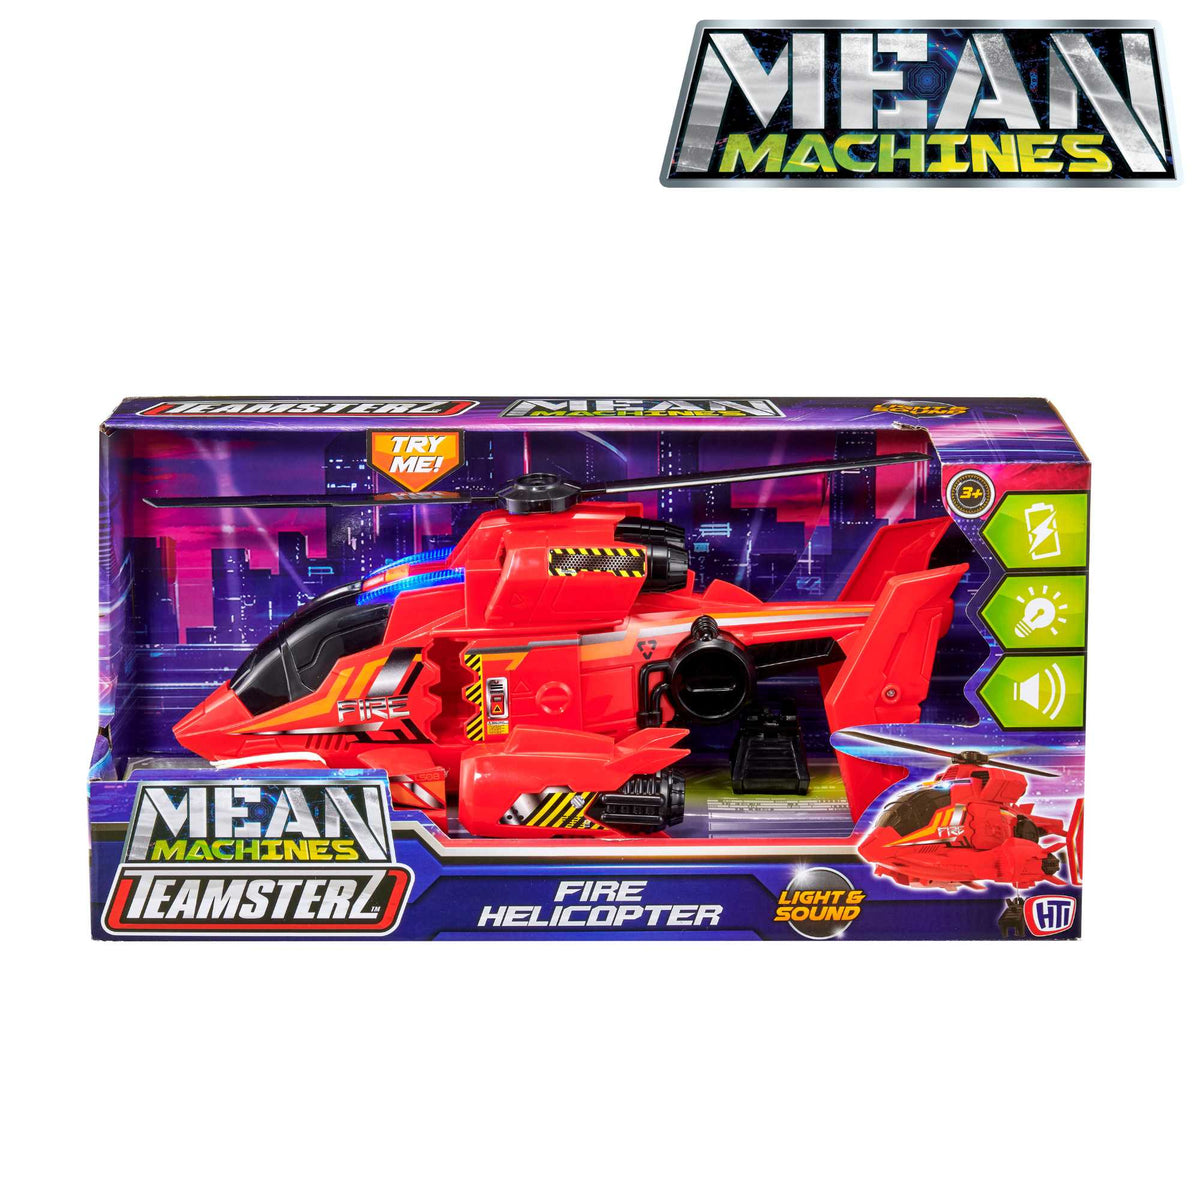 Teamsterz Mean Machine Lights &amp; Sounds Fire Rescue Helicopter